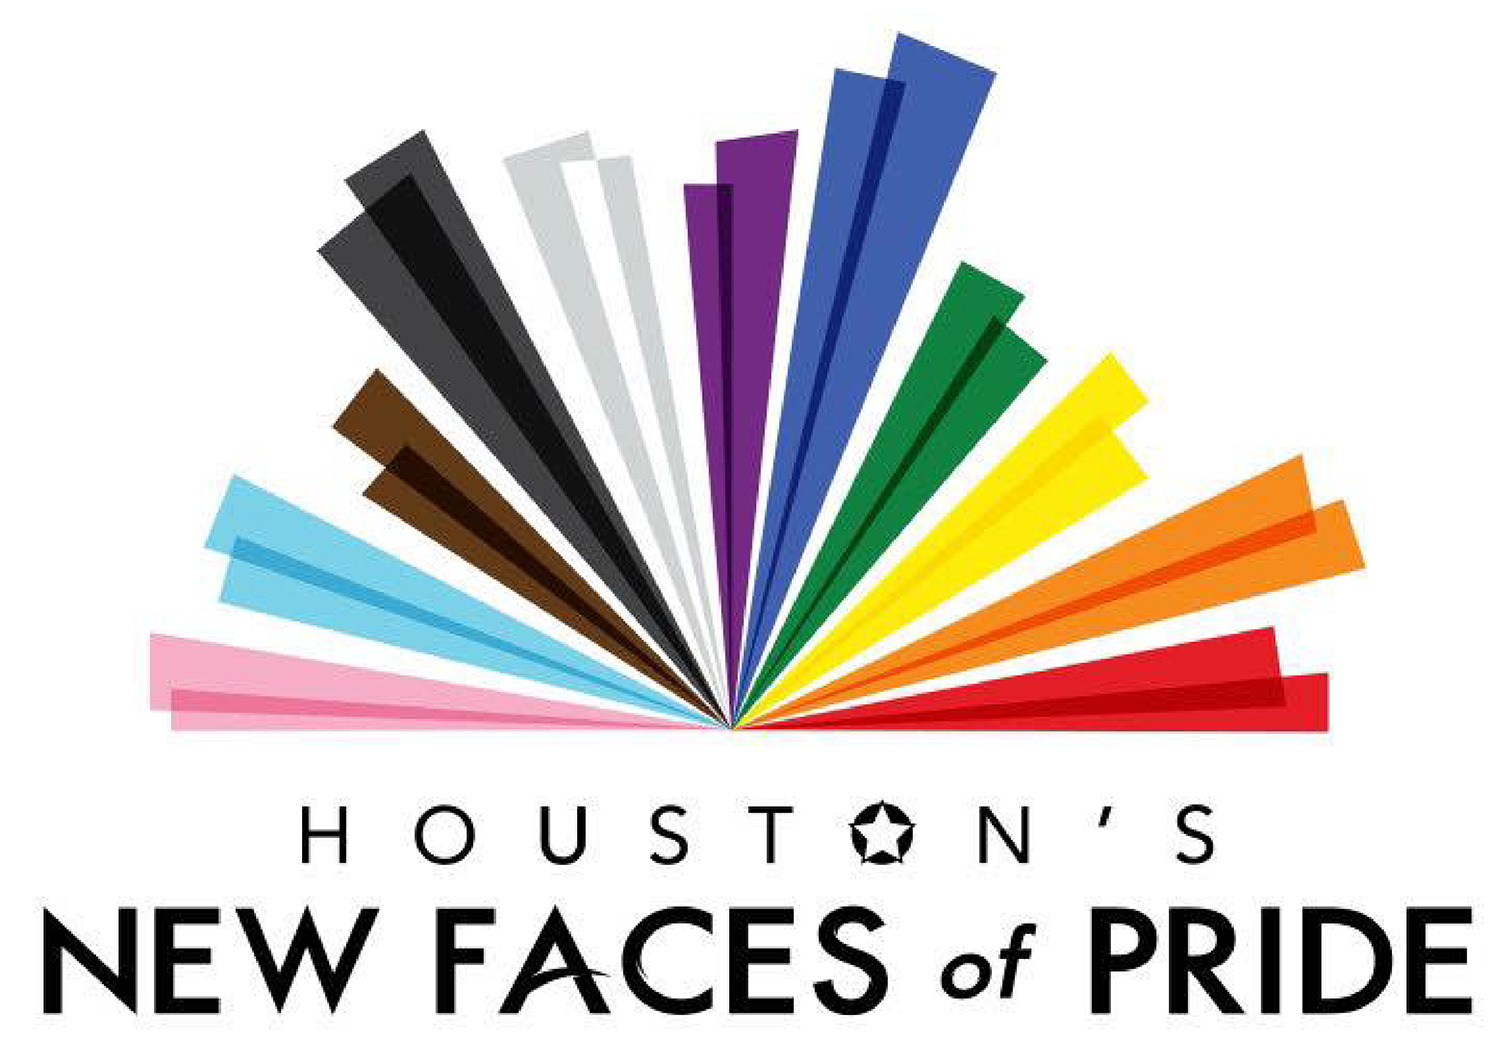 Houston's New Faces of Pride smaller